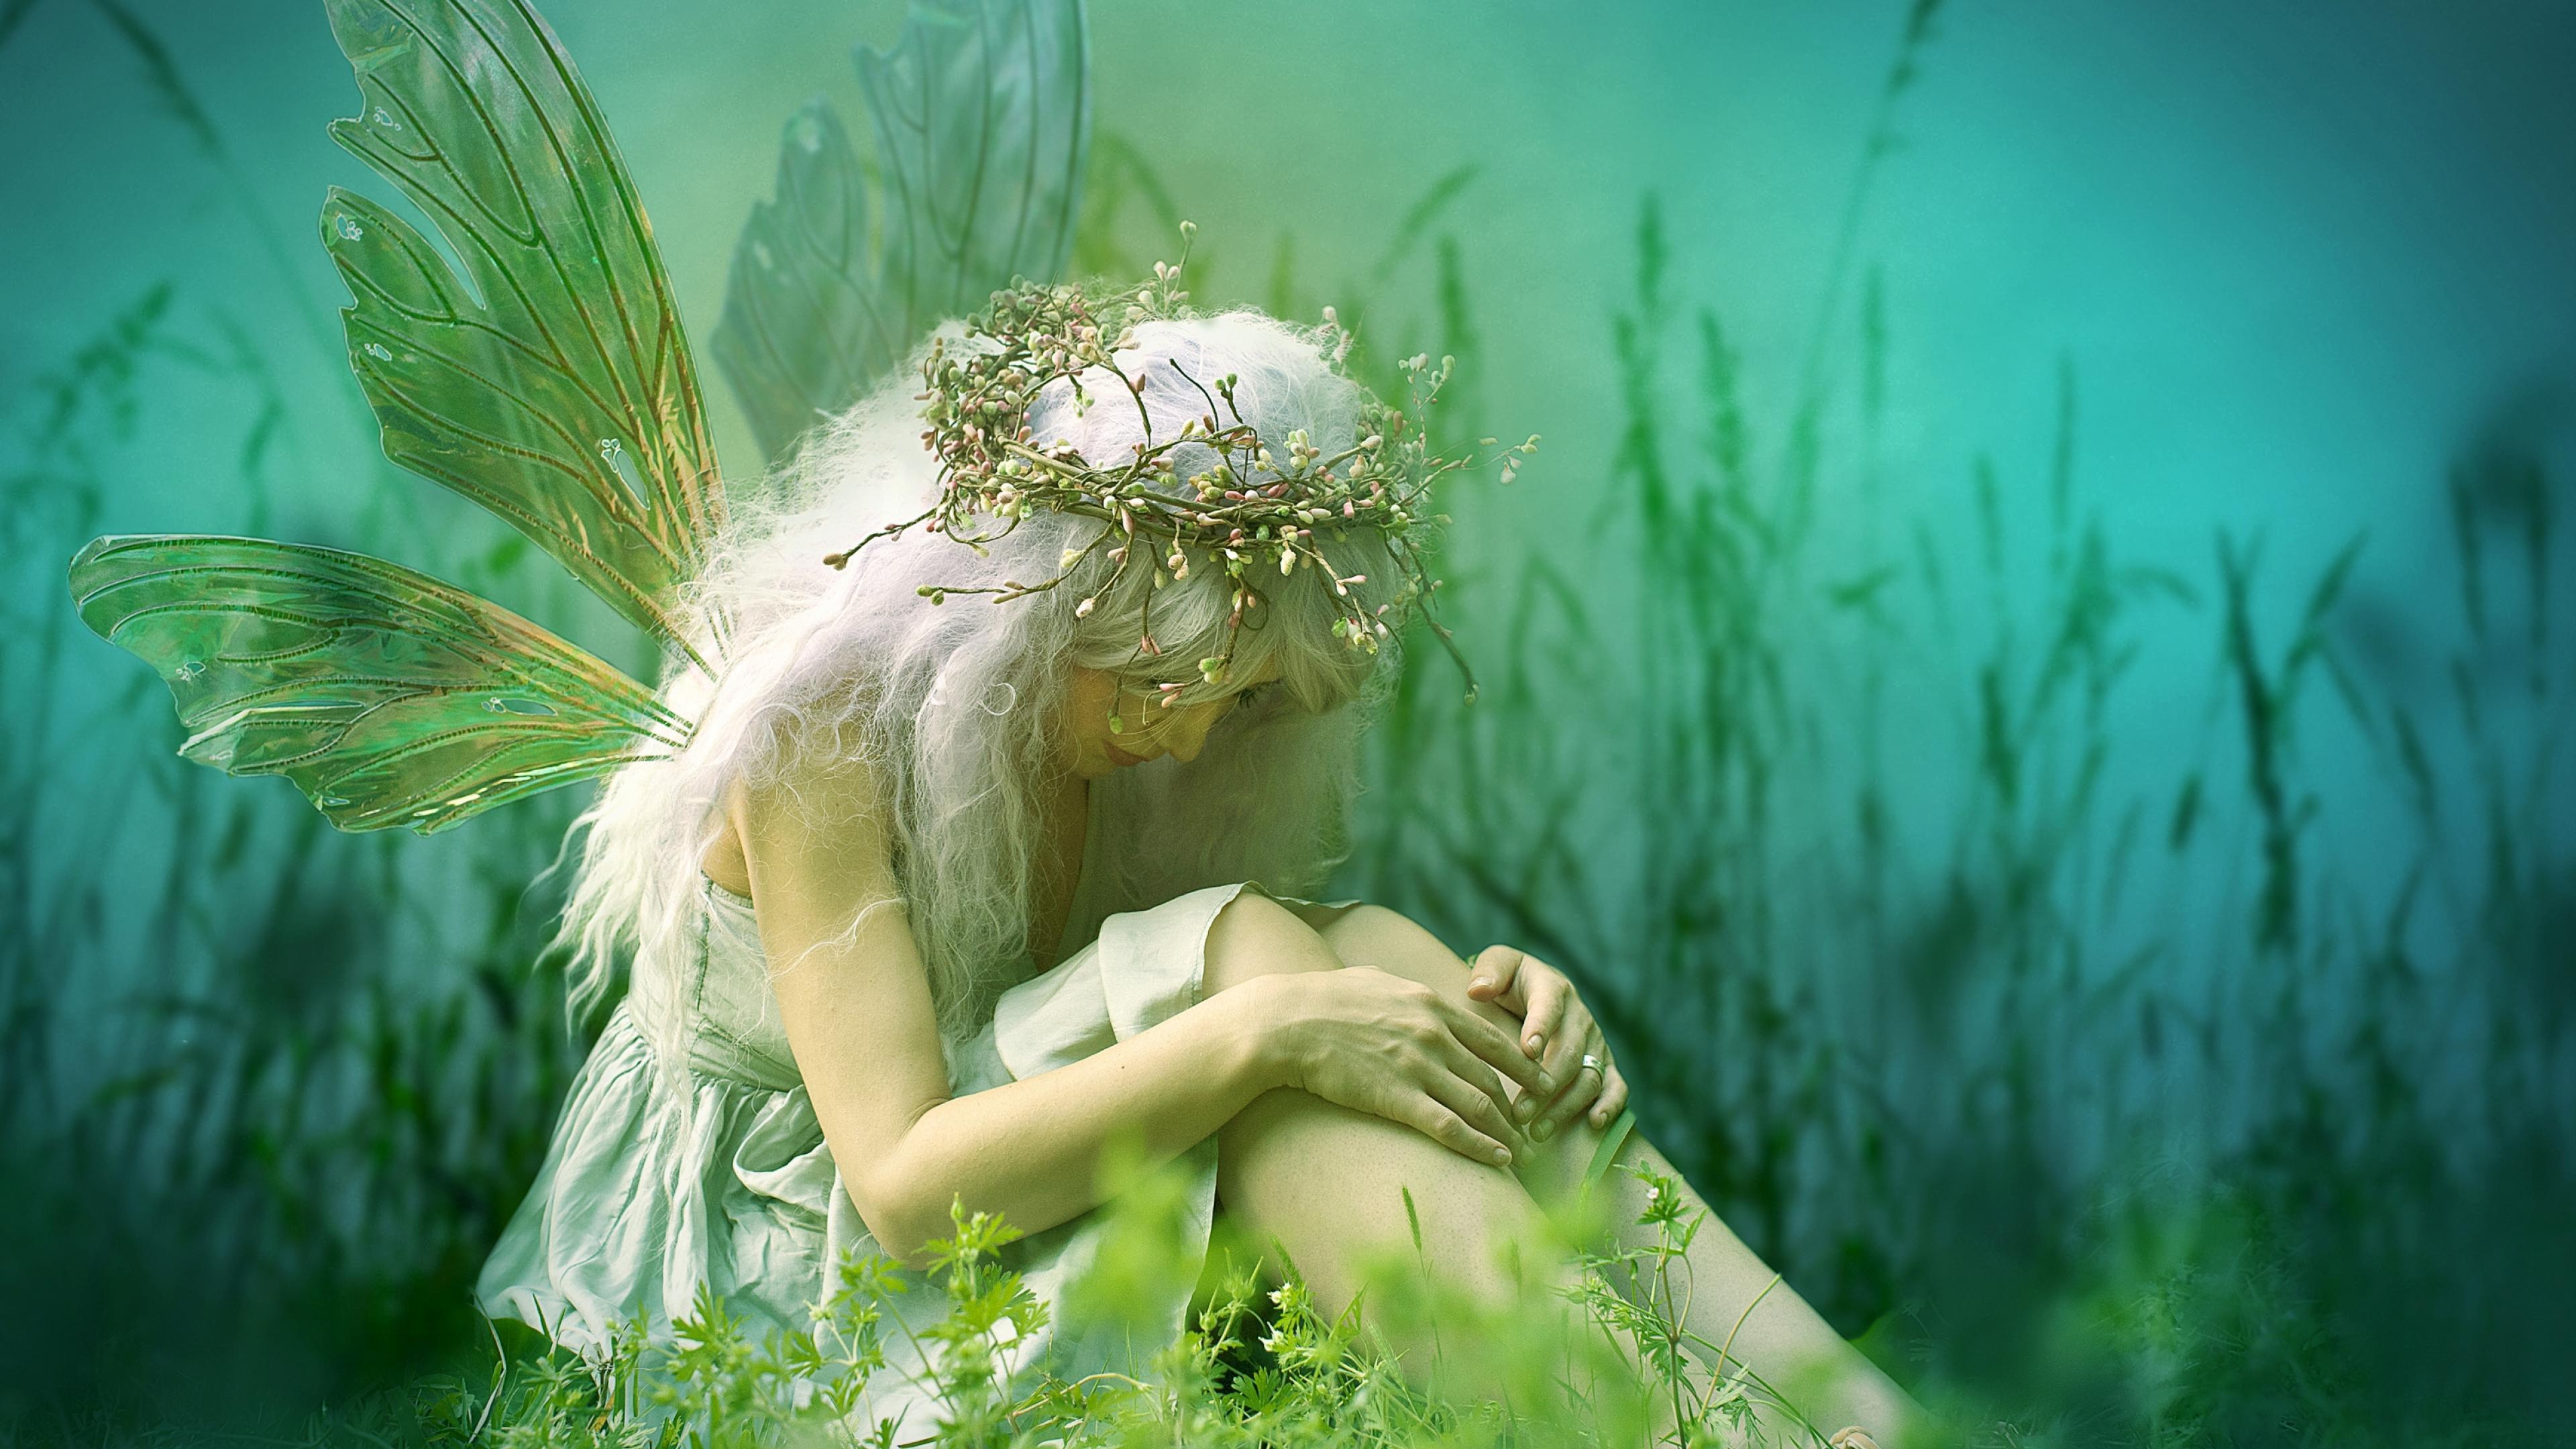 Sad Forest Fairy 4k Ultra HD Wallpaper. Background Image